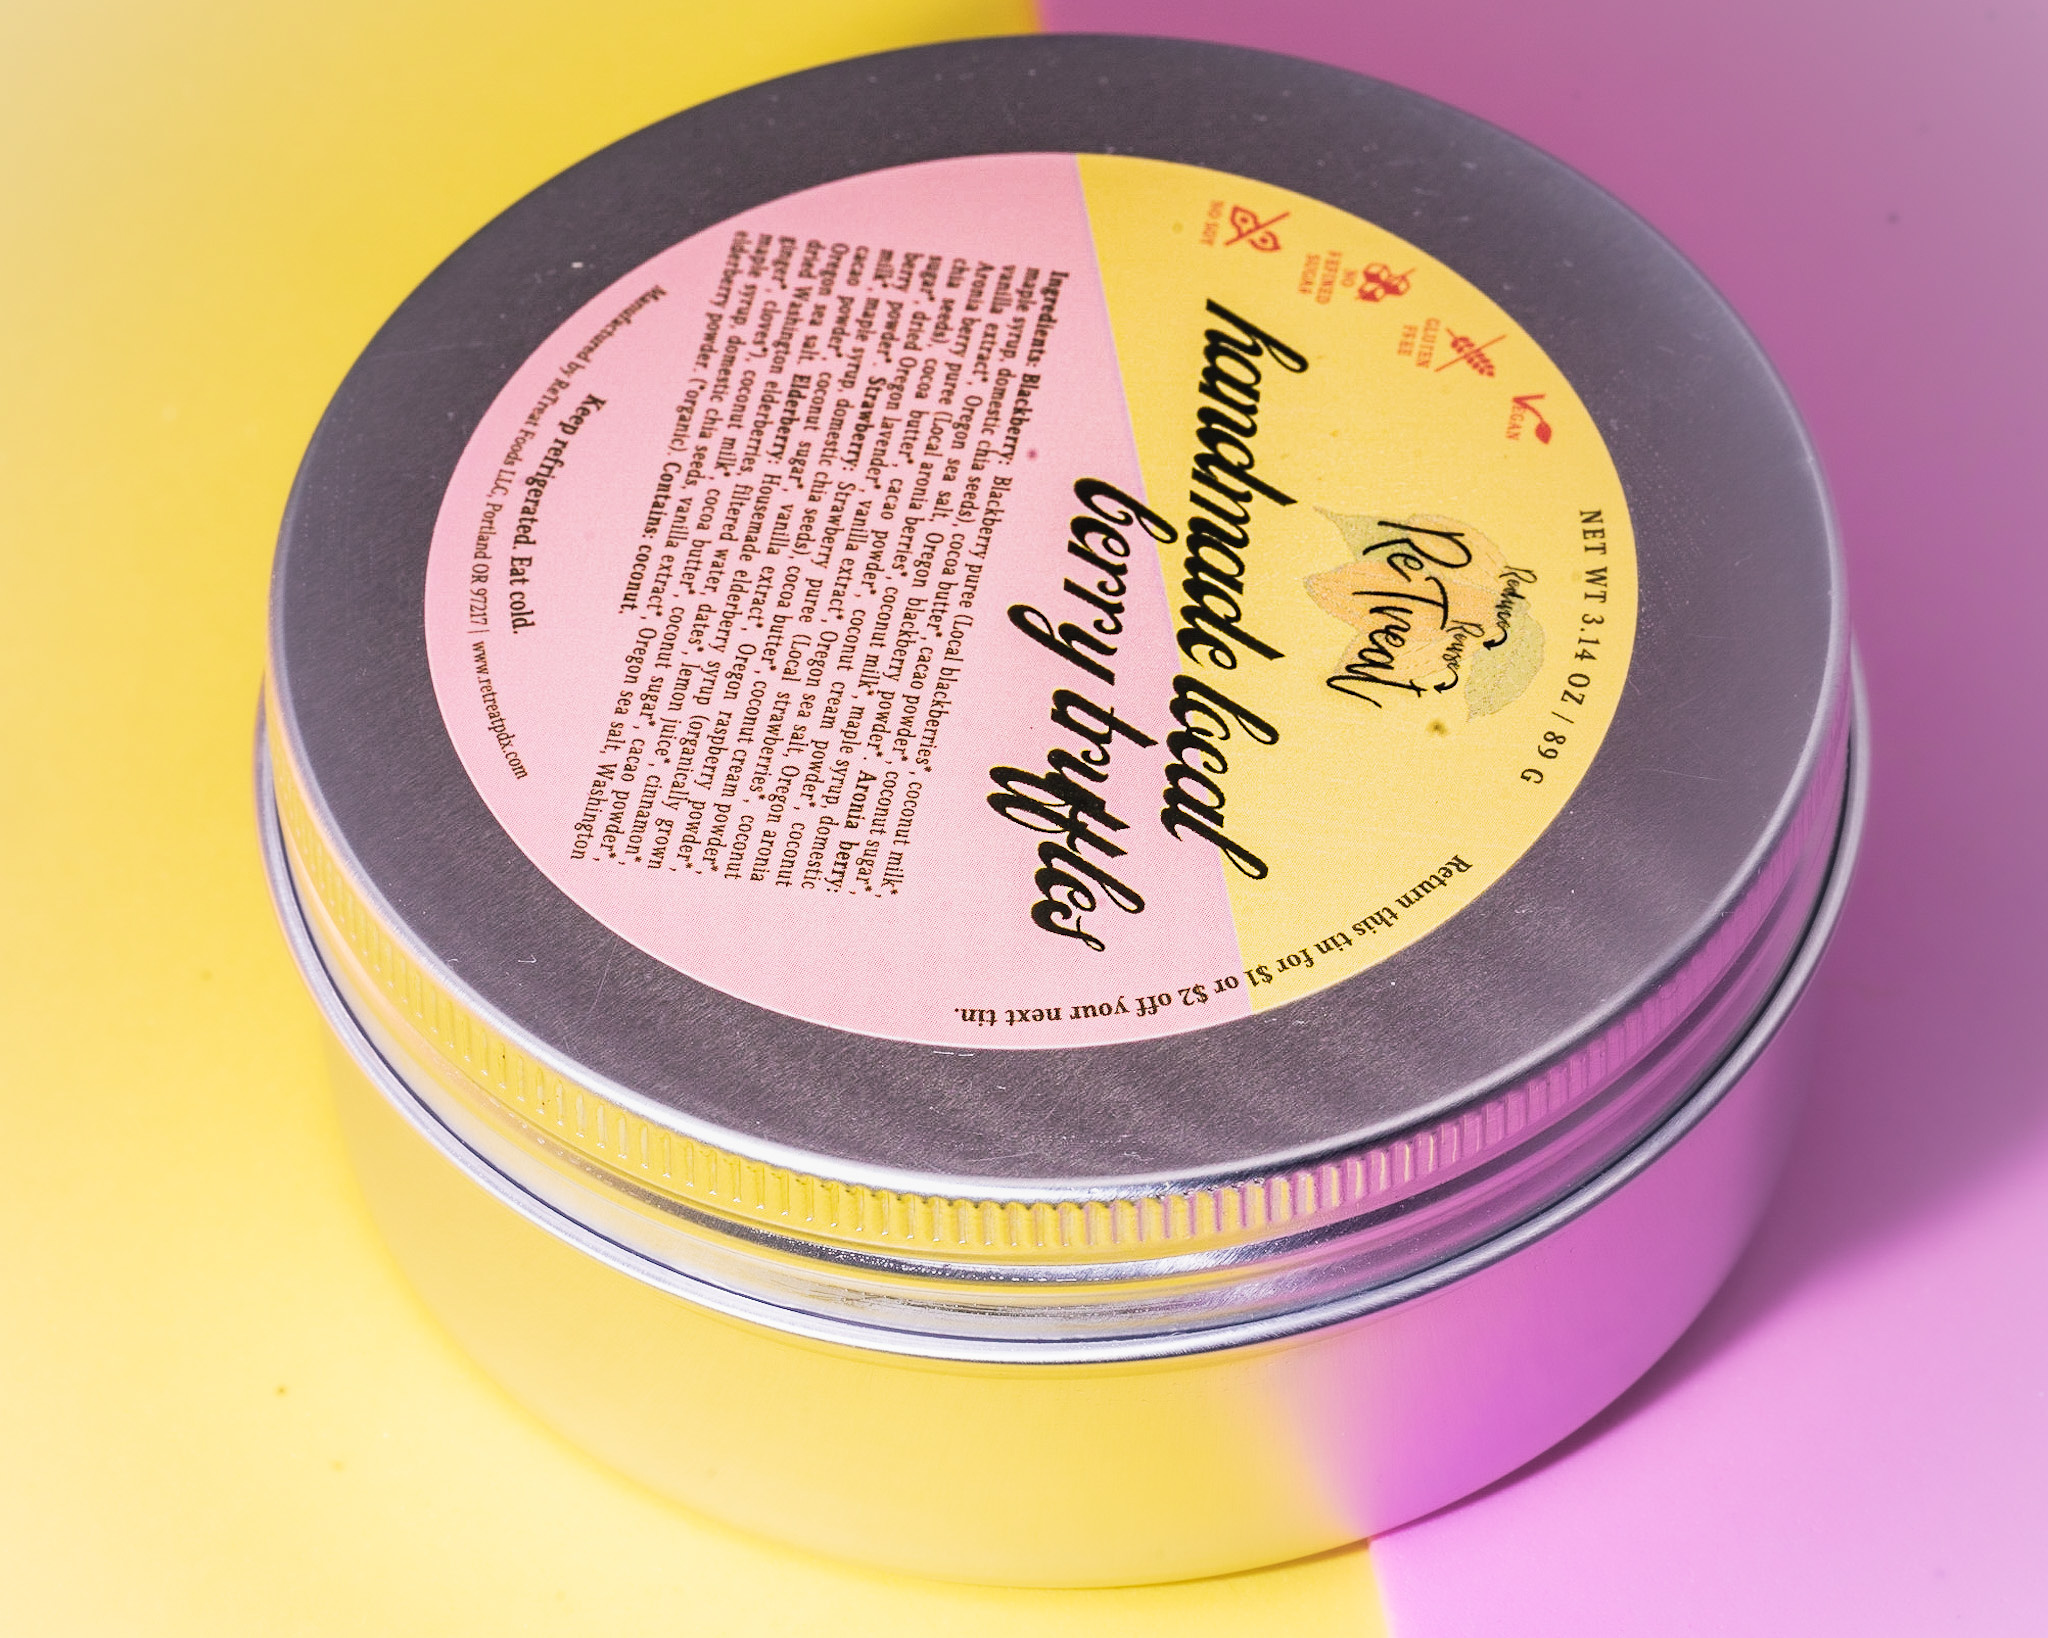 A circular tin with a yellow and pink label sits on a yellow and pink surface